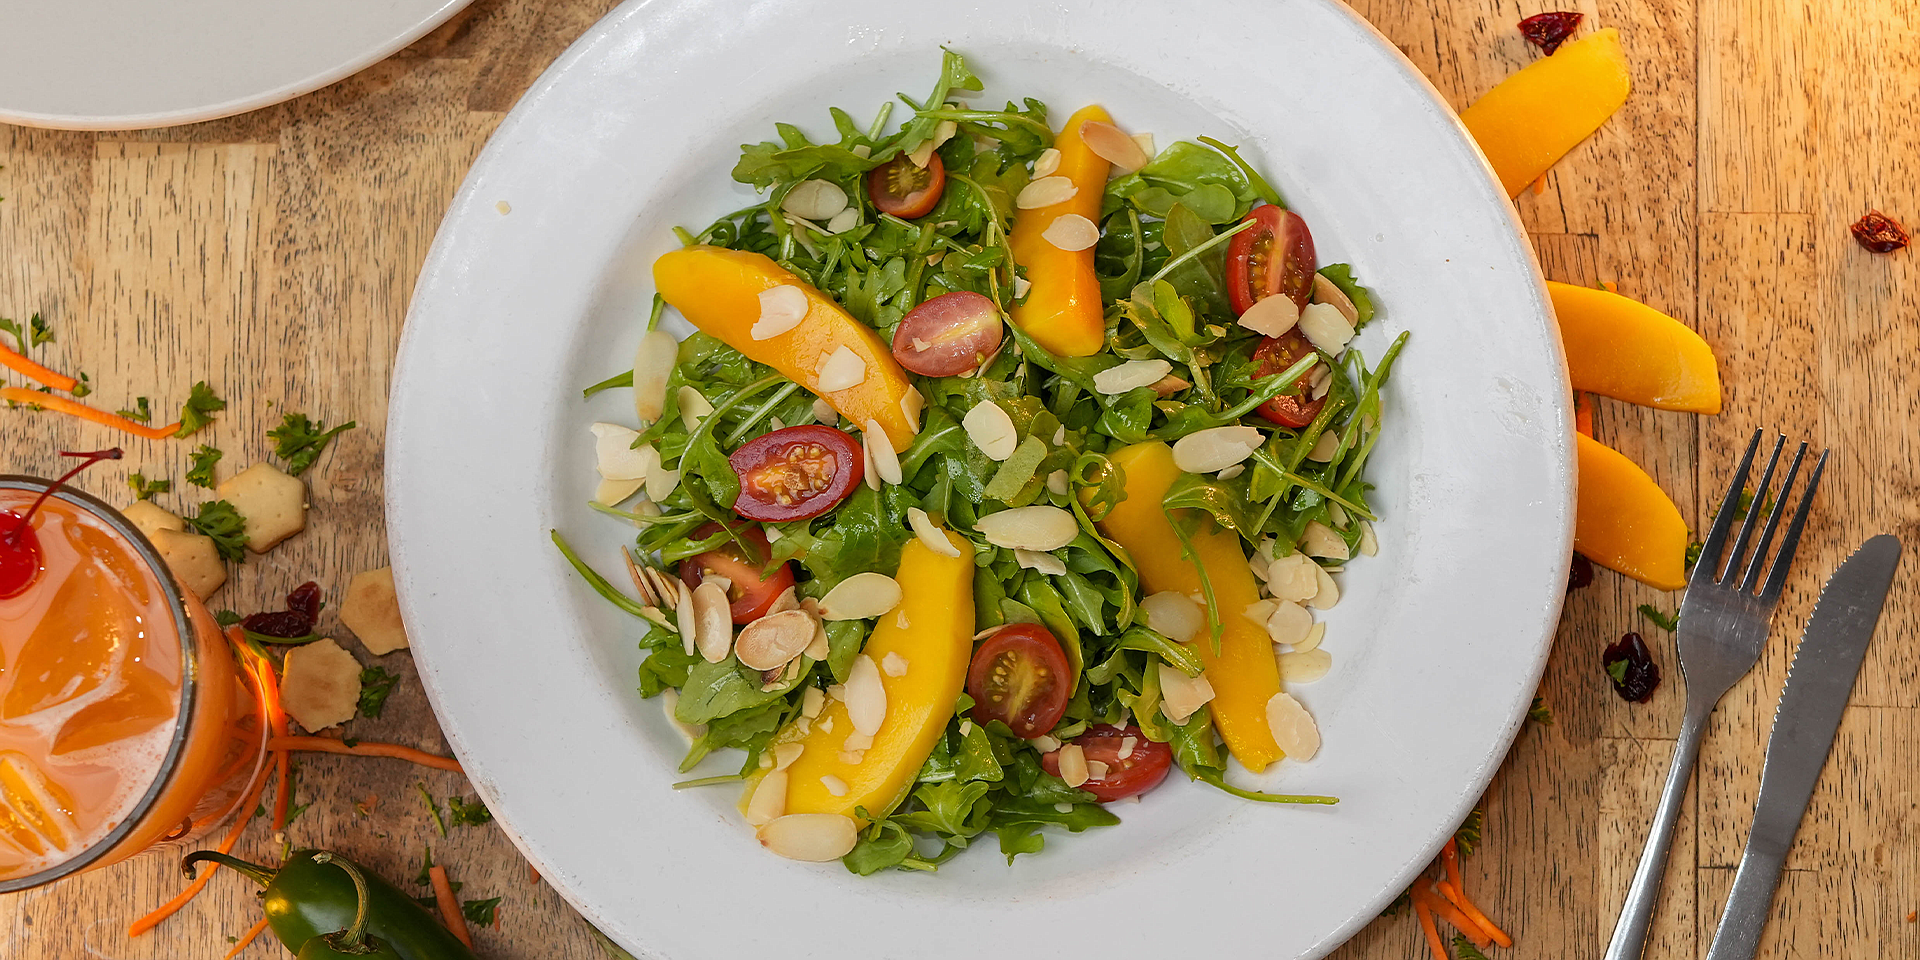 The Rocket salad at Lucky Pelican is adorned with mango slices.